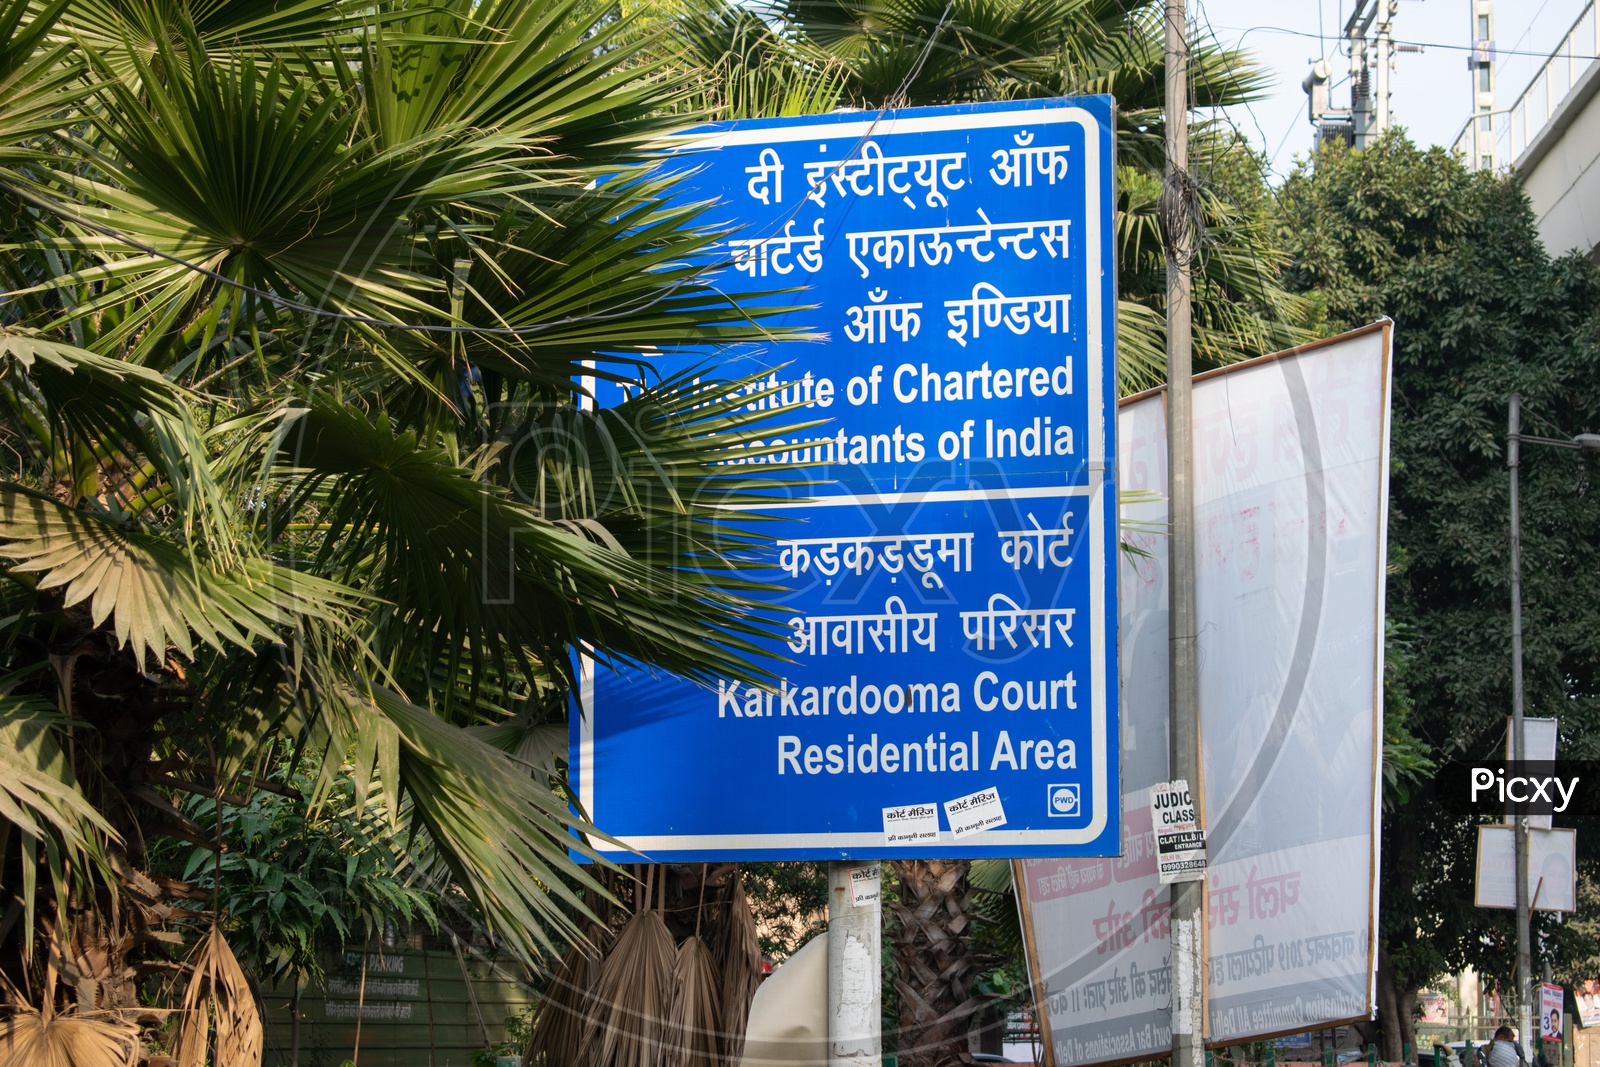 Sign Board for Institute of Chartered Accountants of India and Karkarduma Court Residential Area